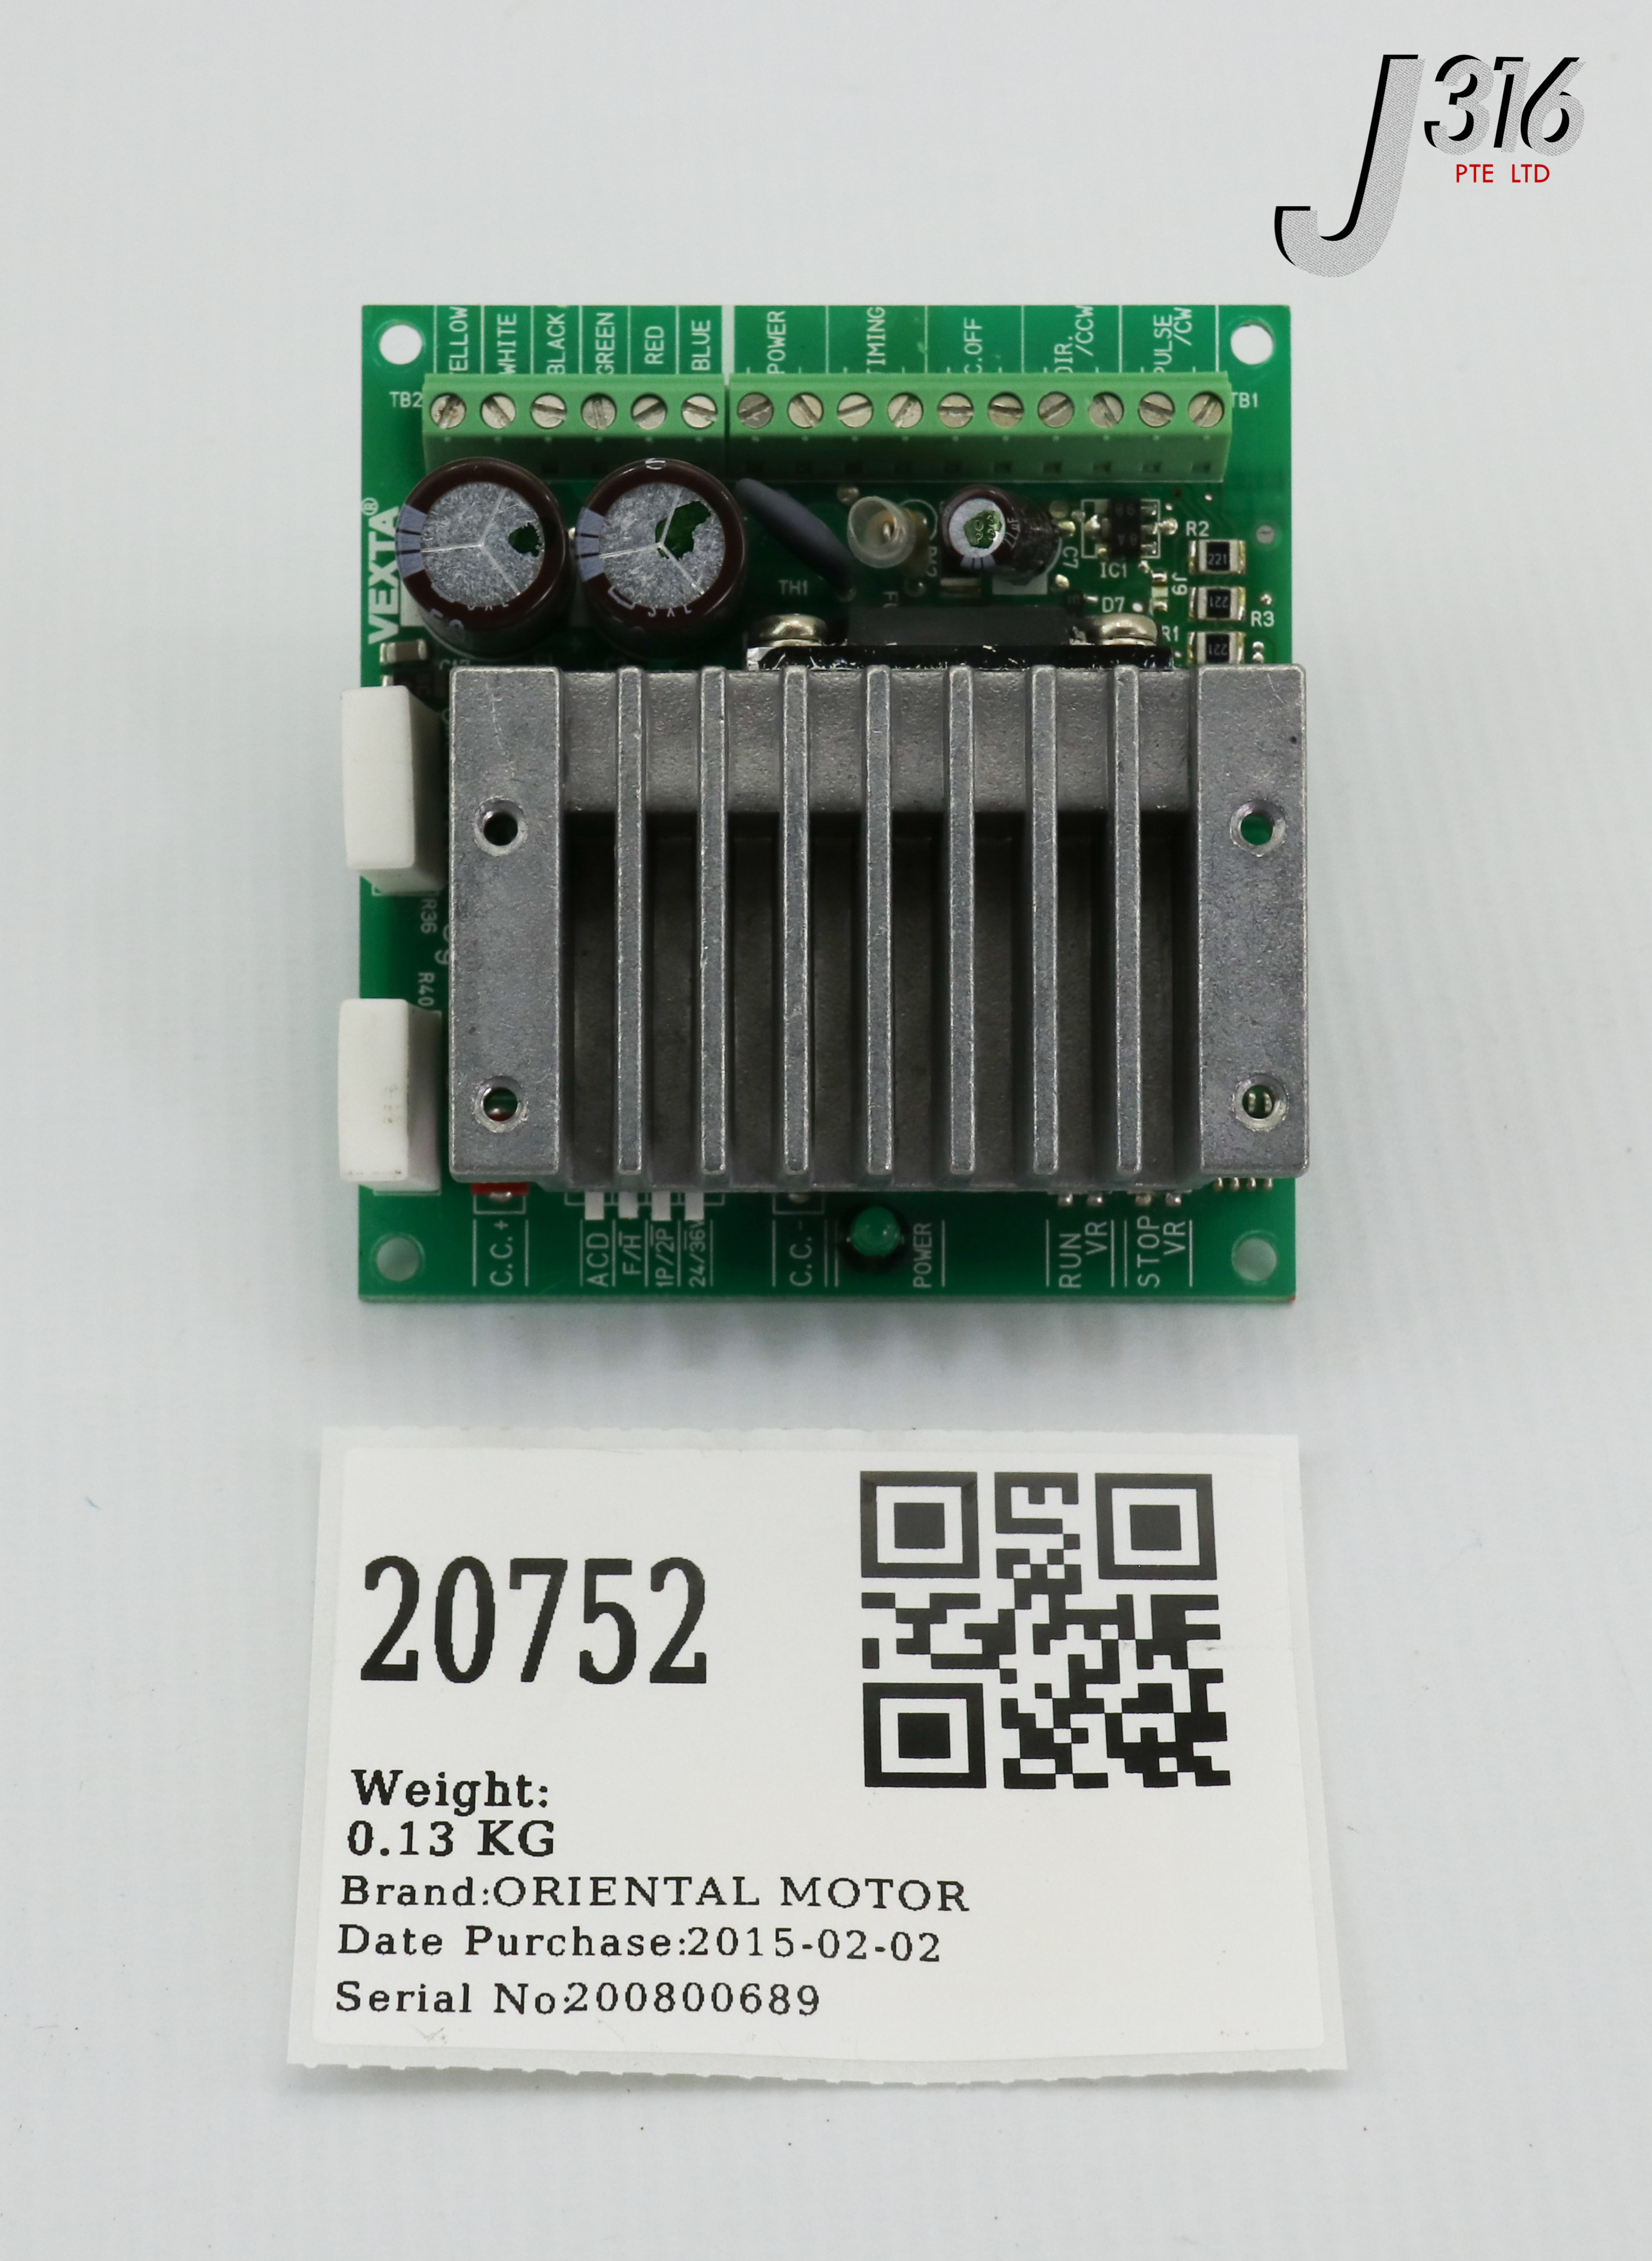 20752 ORIENTAL MOTOR PCB, 2-PHASE STEPPING MOTOR DRIVER CSD2112-T -  J316Gallery